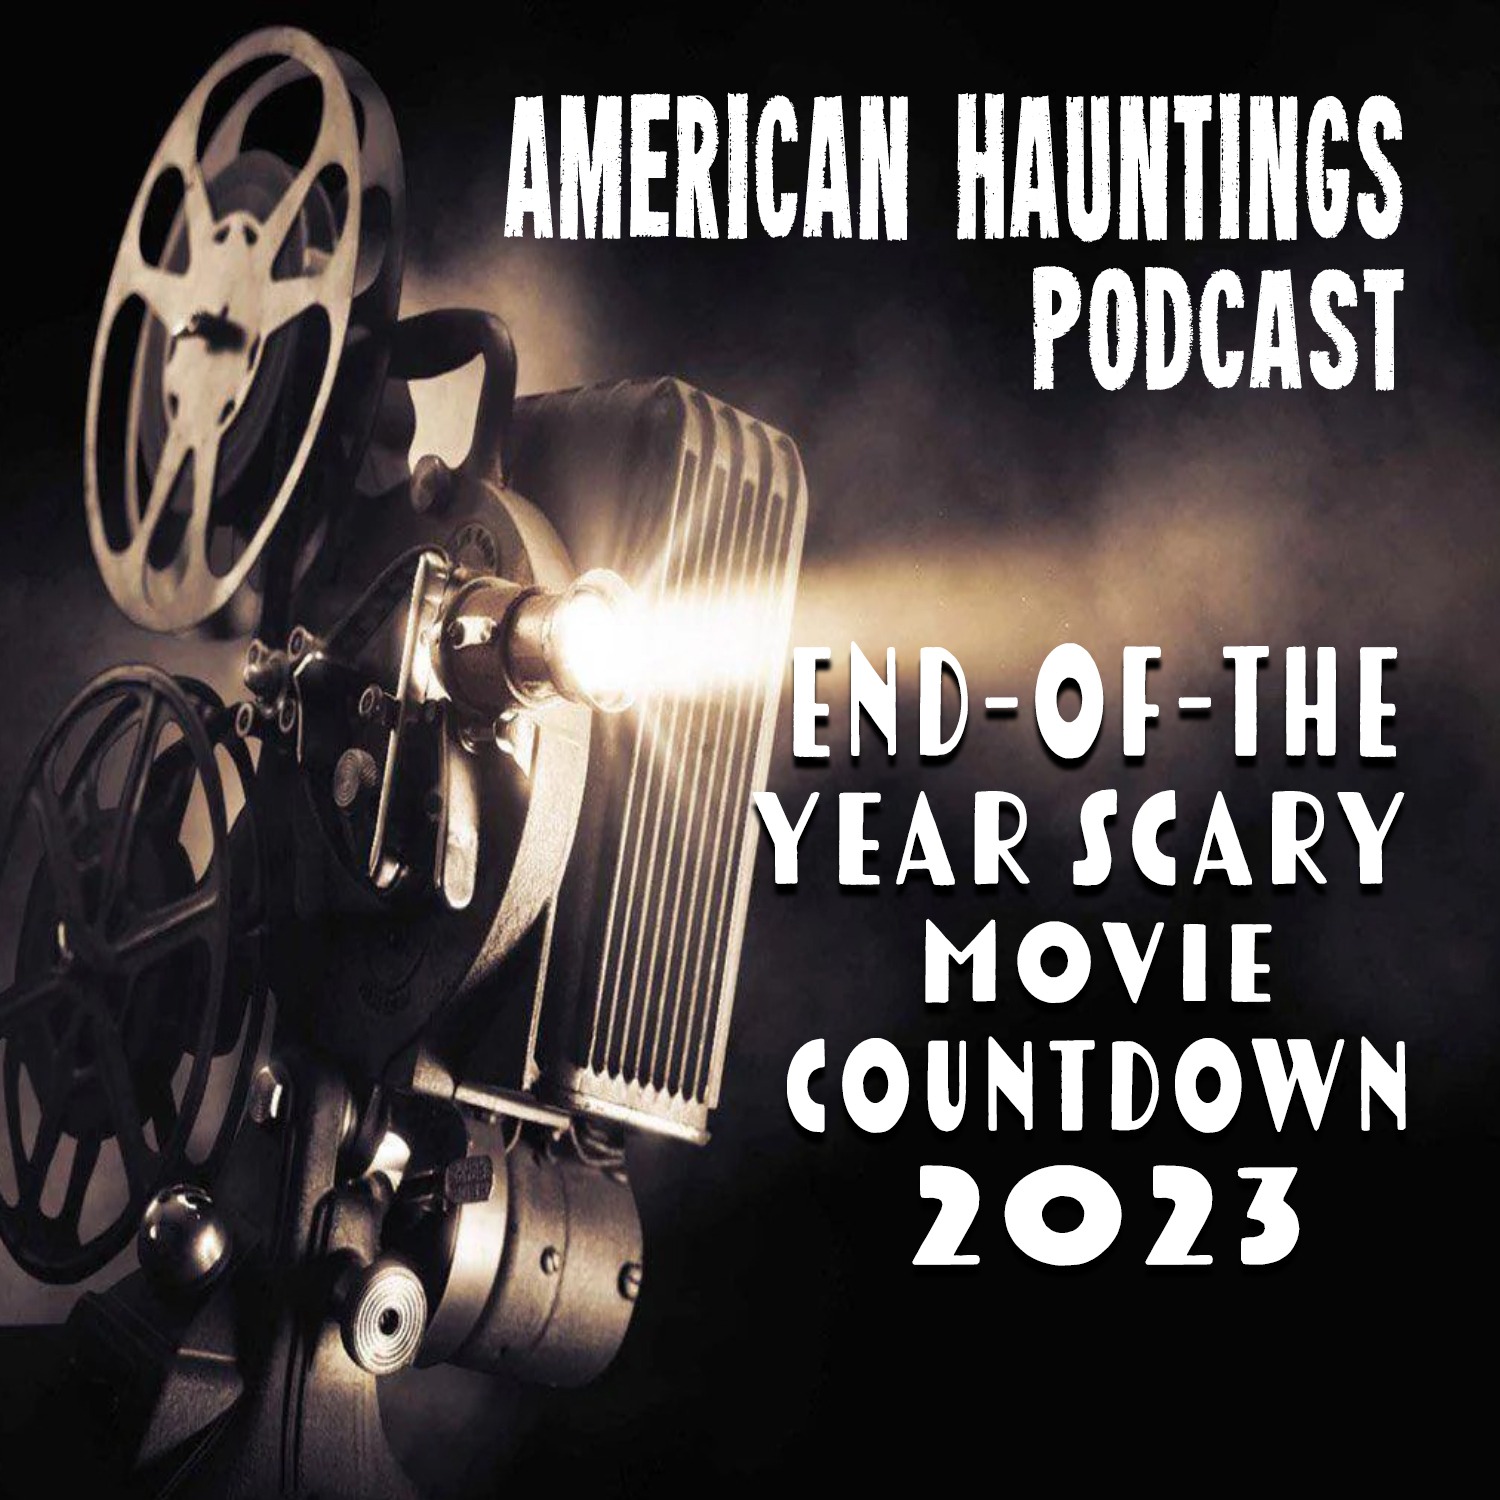 End-of-the-Year Scary Movie Countdown Show